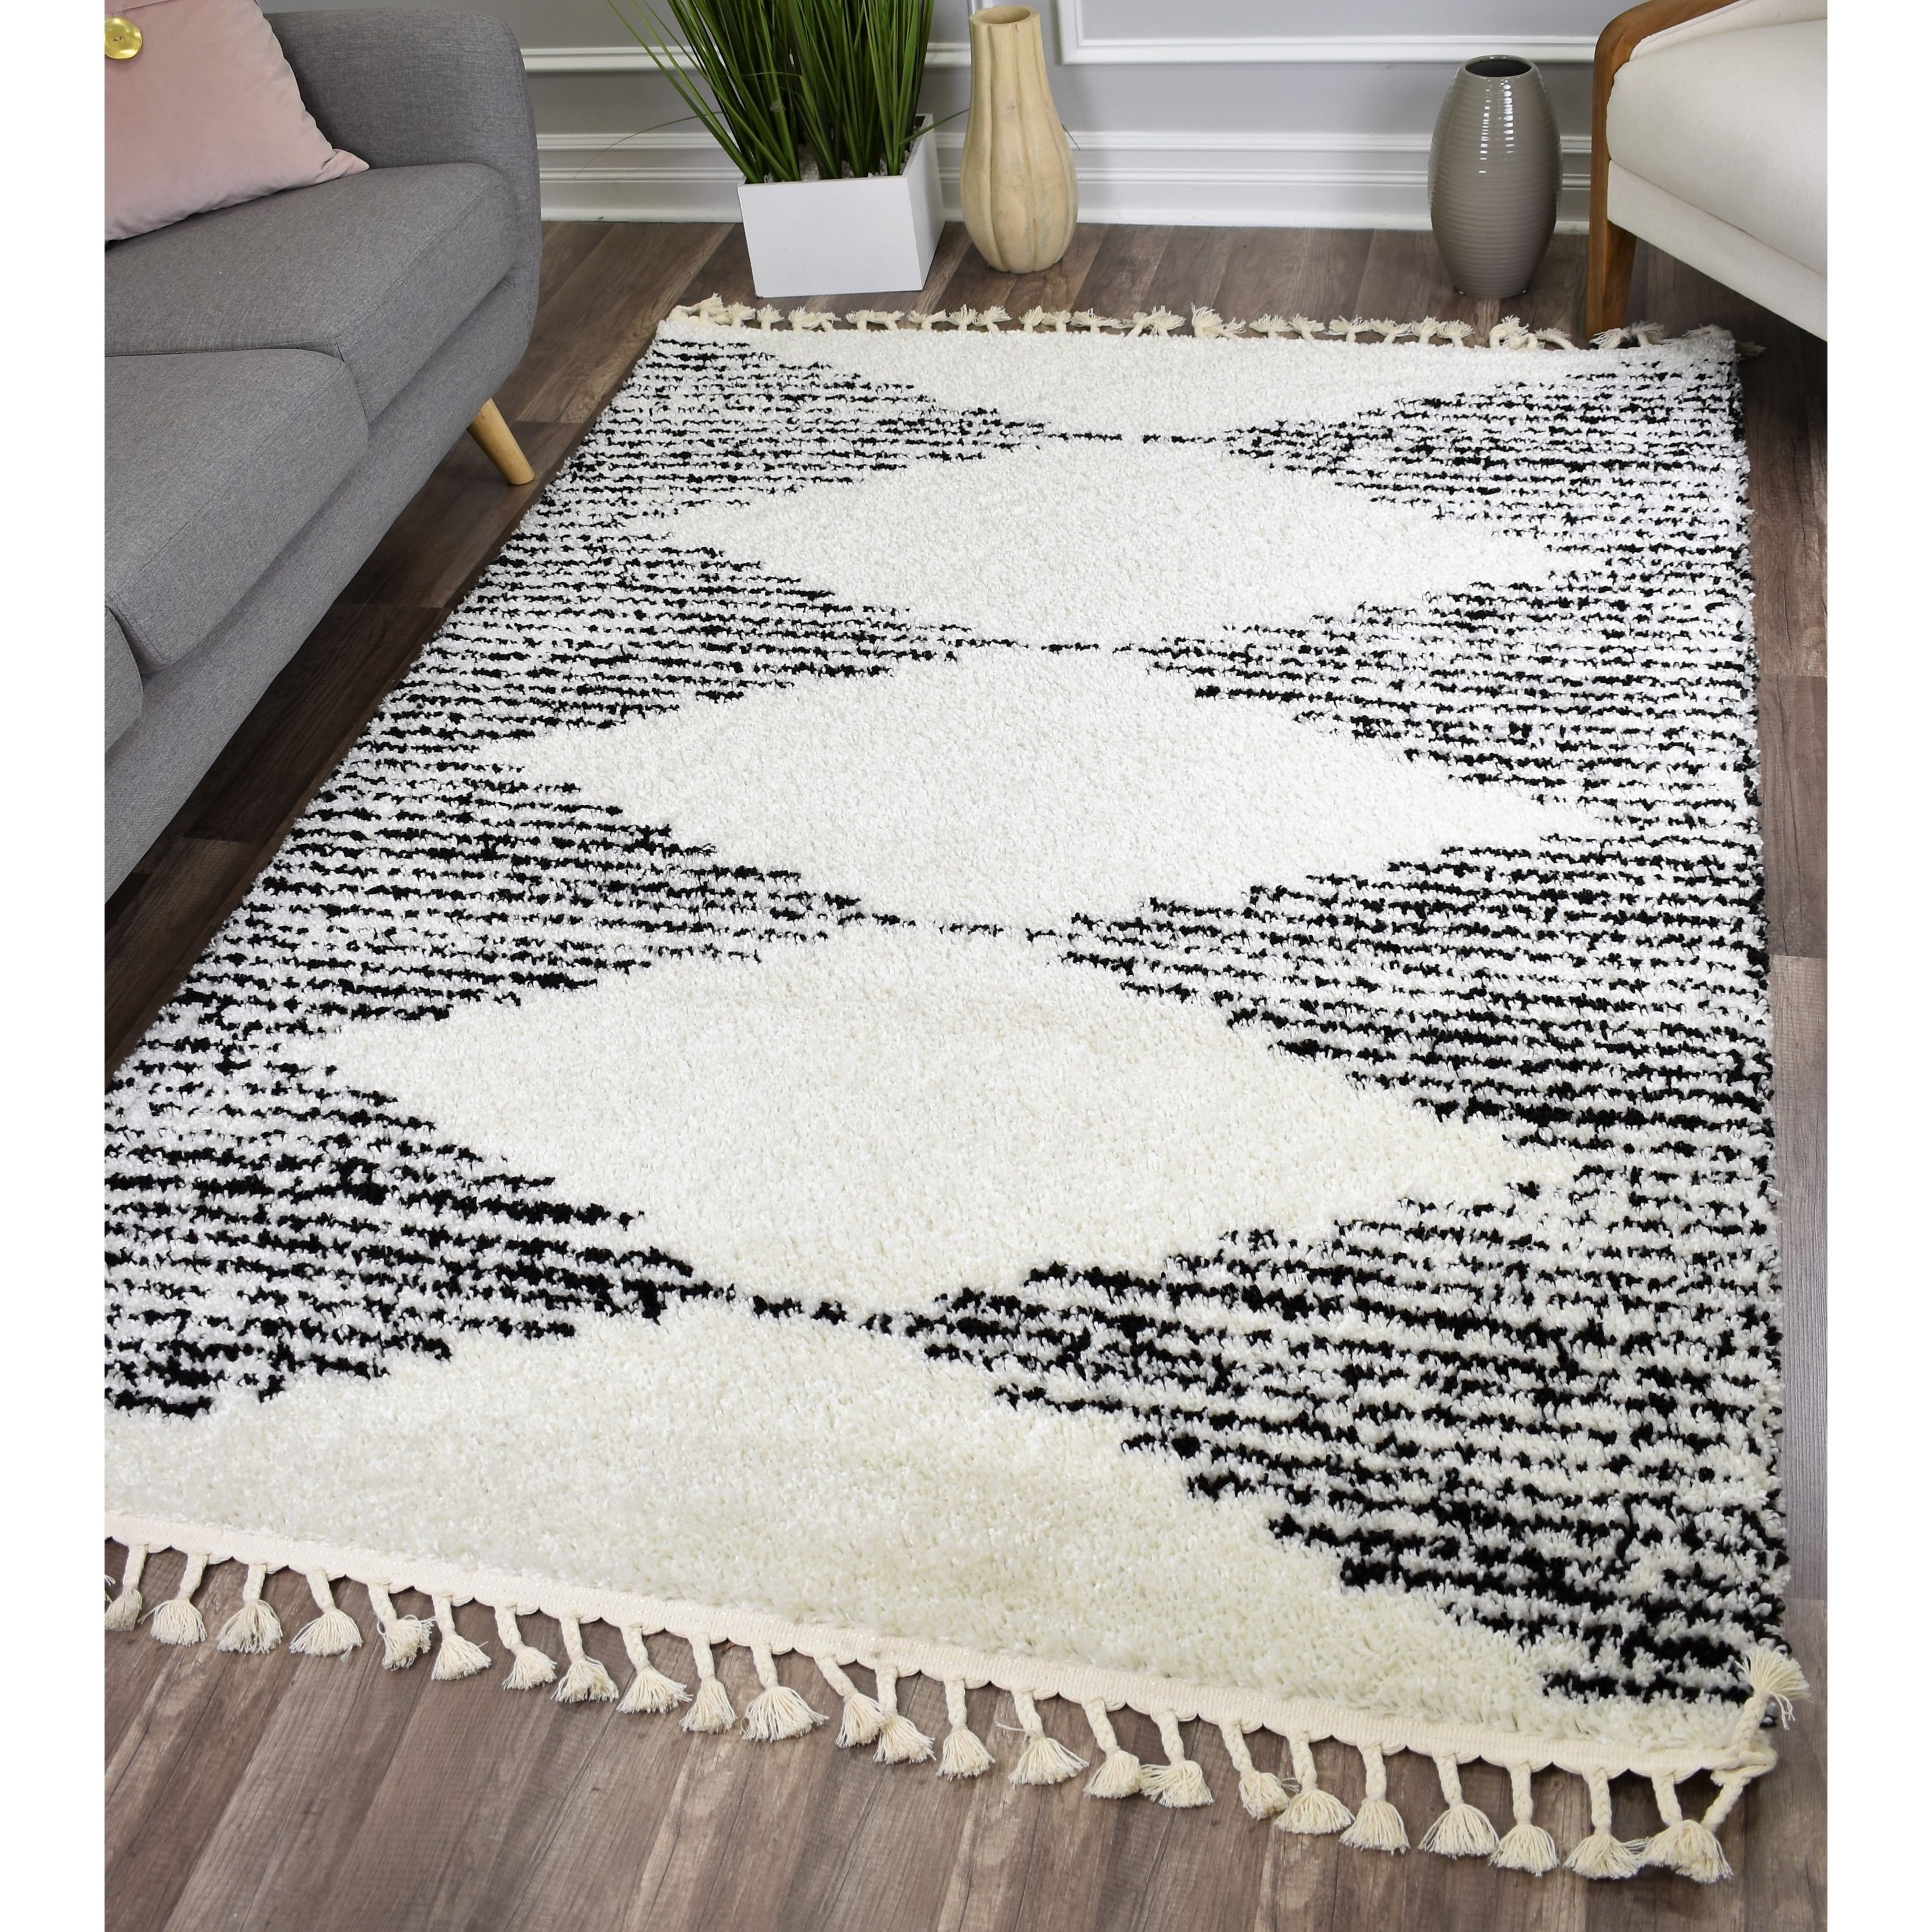 Cosmoliving Soft And Plush Geometric Moroccan Shag Tassel Area Rug – On  Sale – Overstock – 28240271 Regarding Pink Soft Touch Shag Rugs (View 14 of 15)